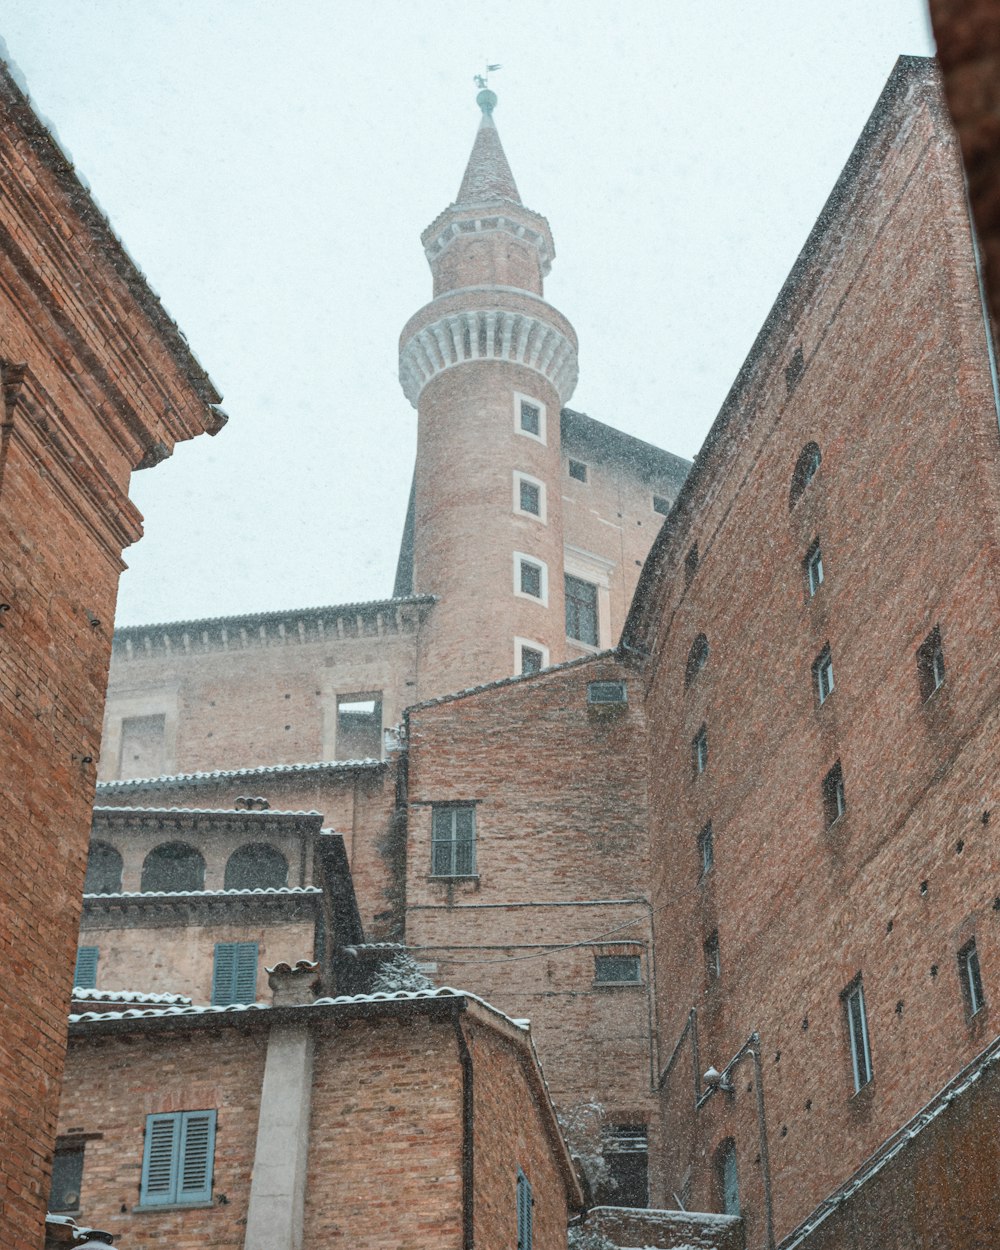 a tall brick building with a clock tower in the background